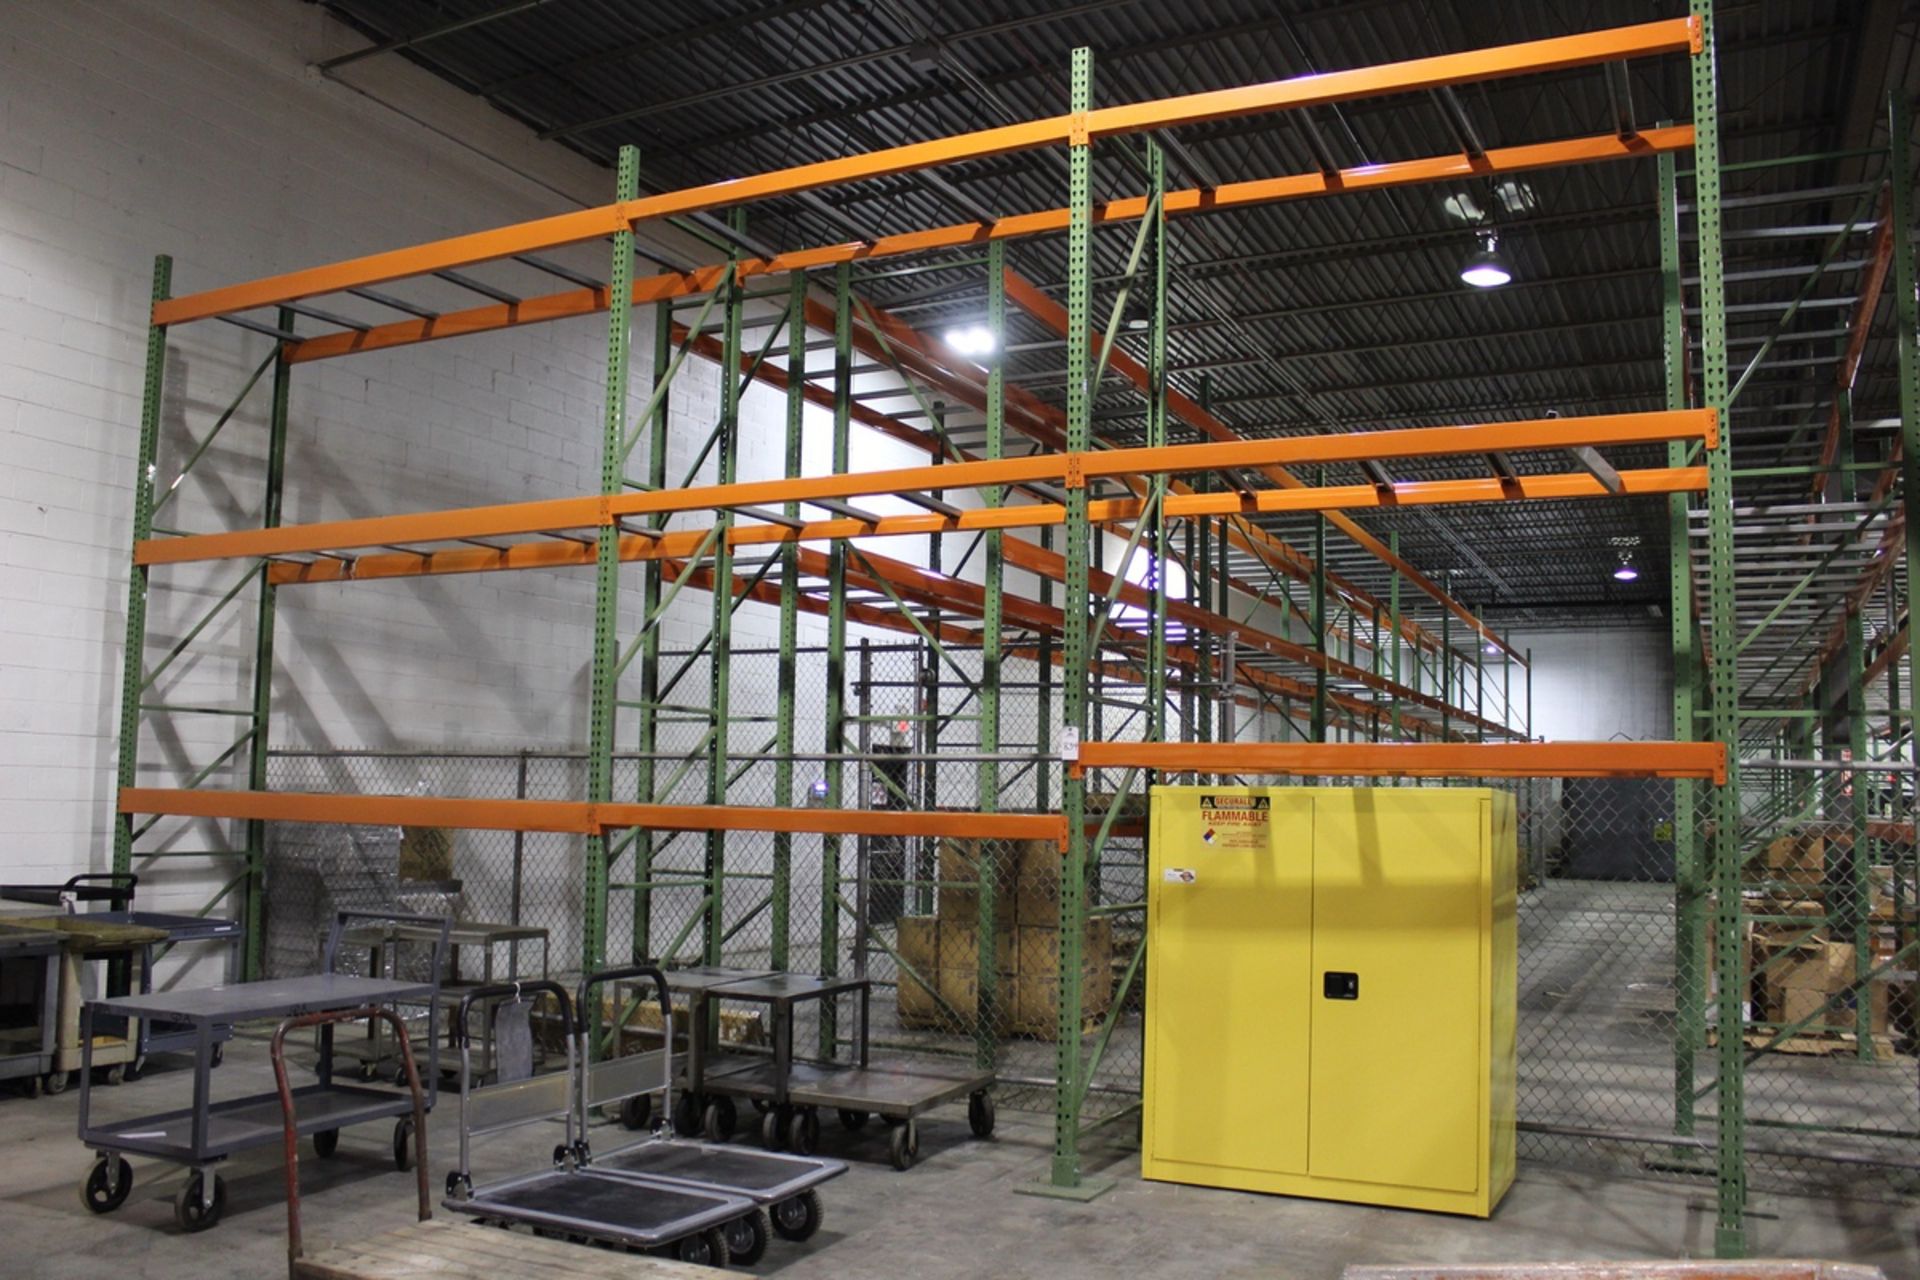 TEAR DROP PALLET RACK (NO CONTENTS) (4) Uprights 16ft x 42in, (6) - Subj to Bulk | Rig Fee: $150